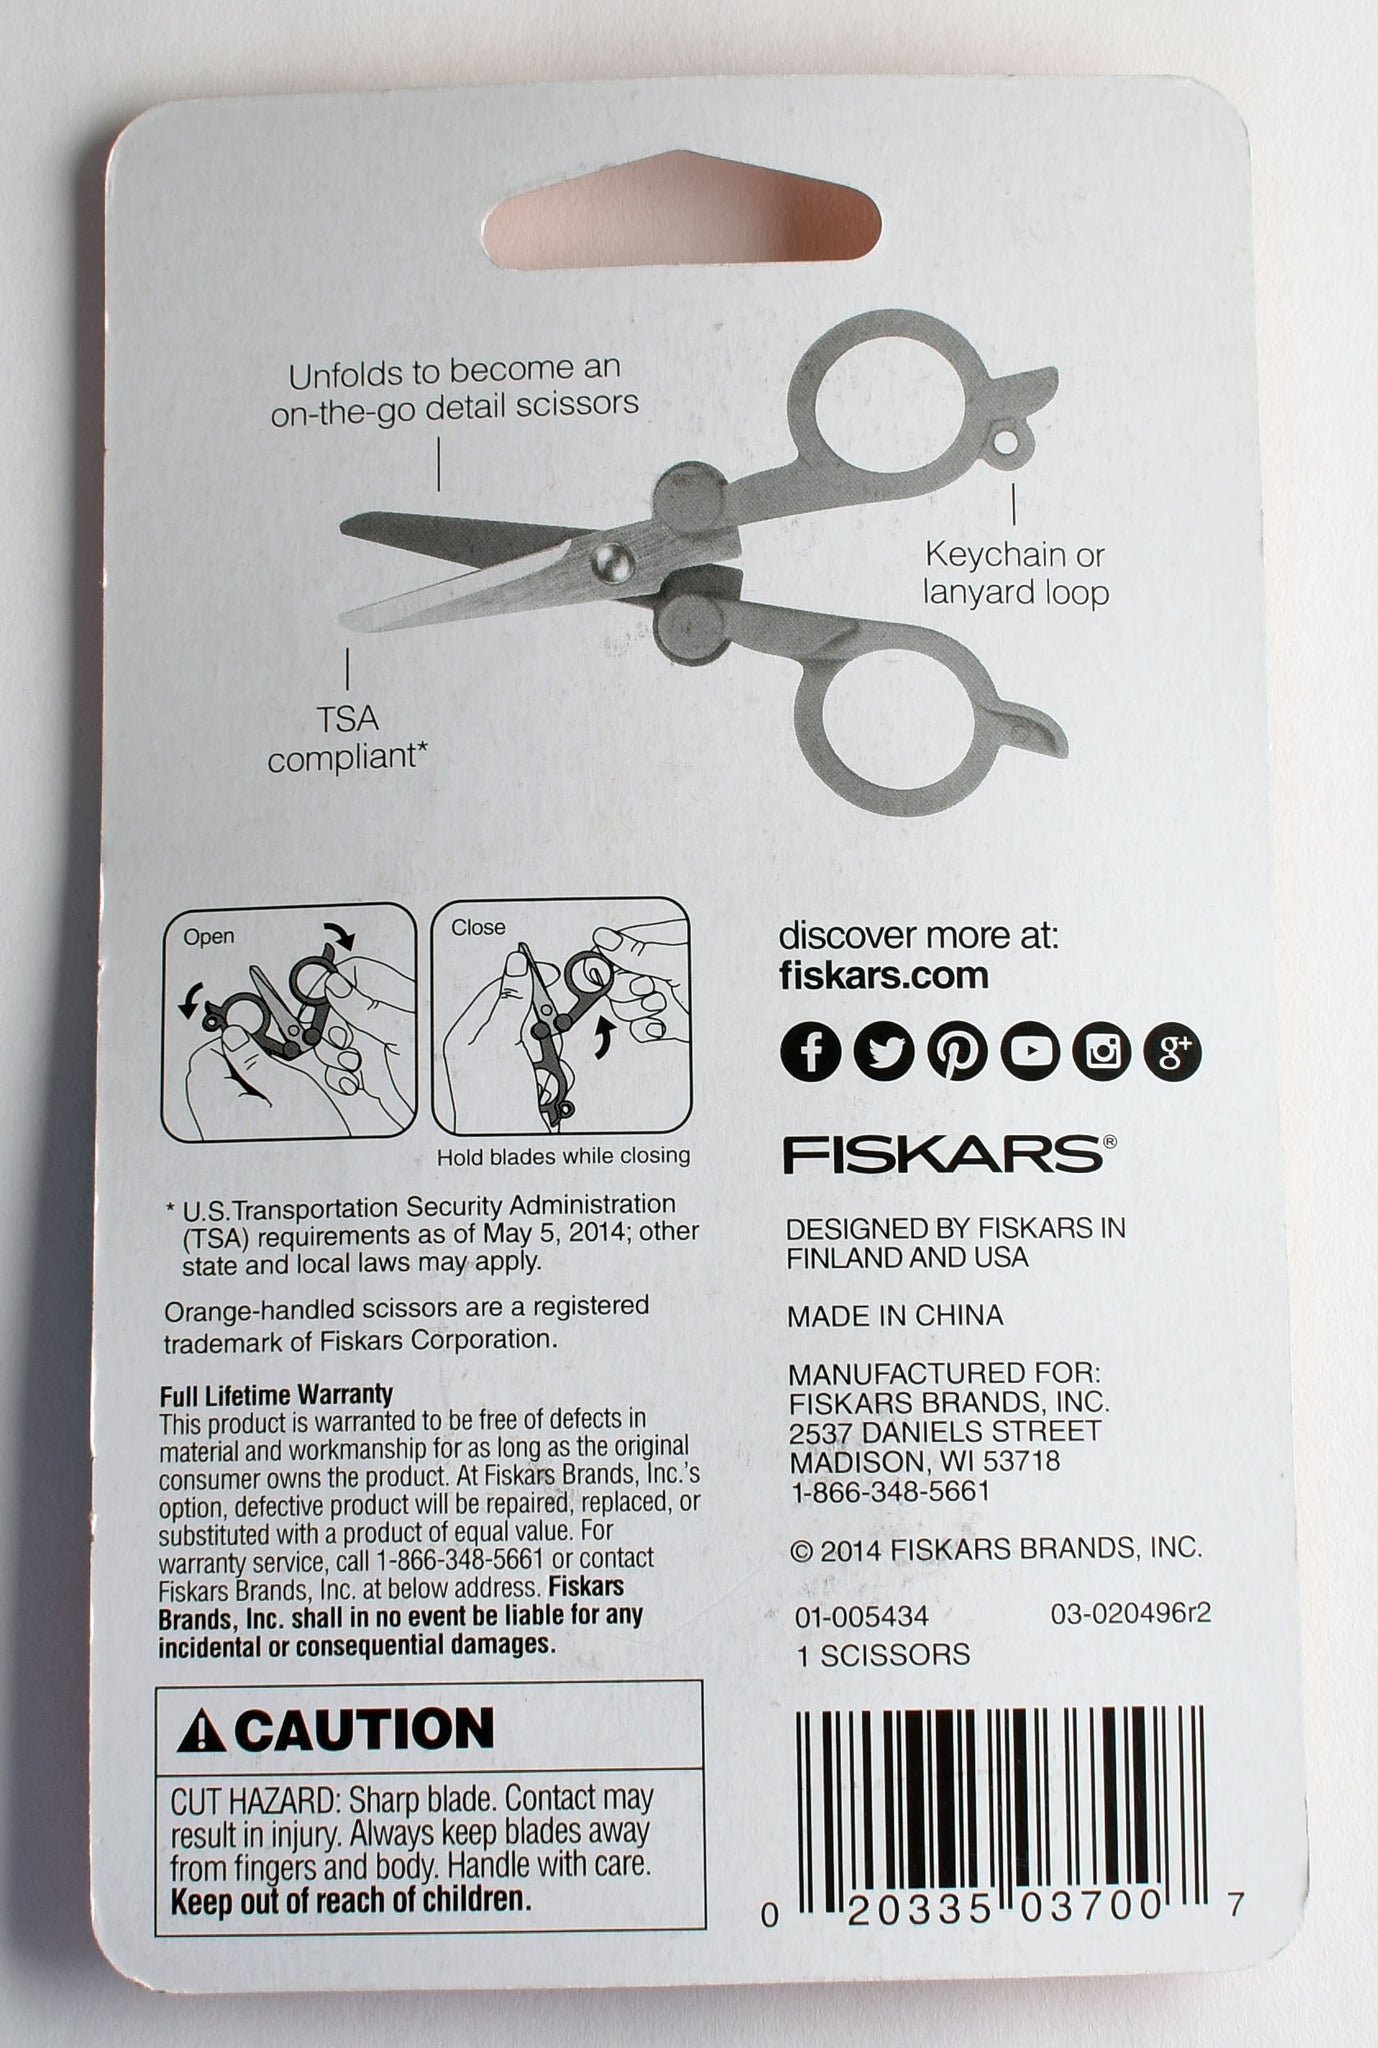 Fiskars Travel Folding Scissors, 3.5 inches open, 2 inches closed,  Air-Travel Safe. Crafts, Knitting.